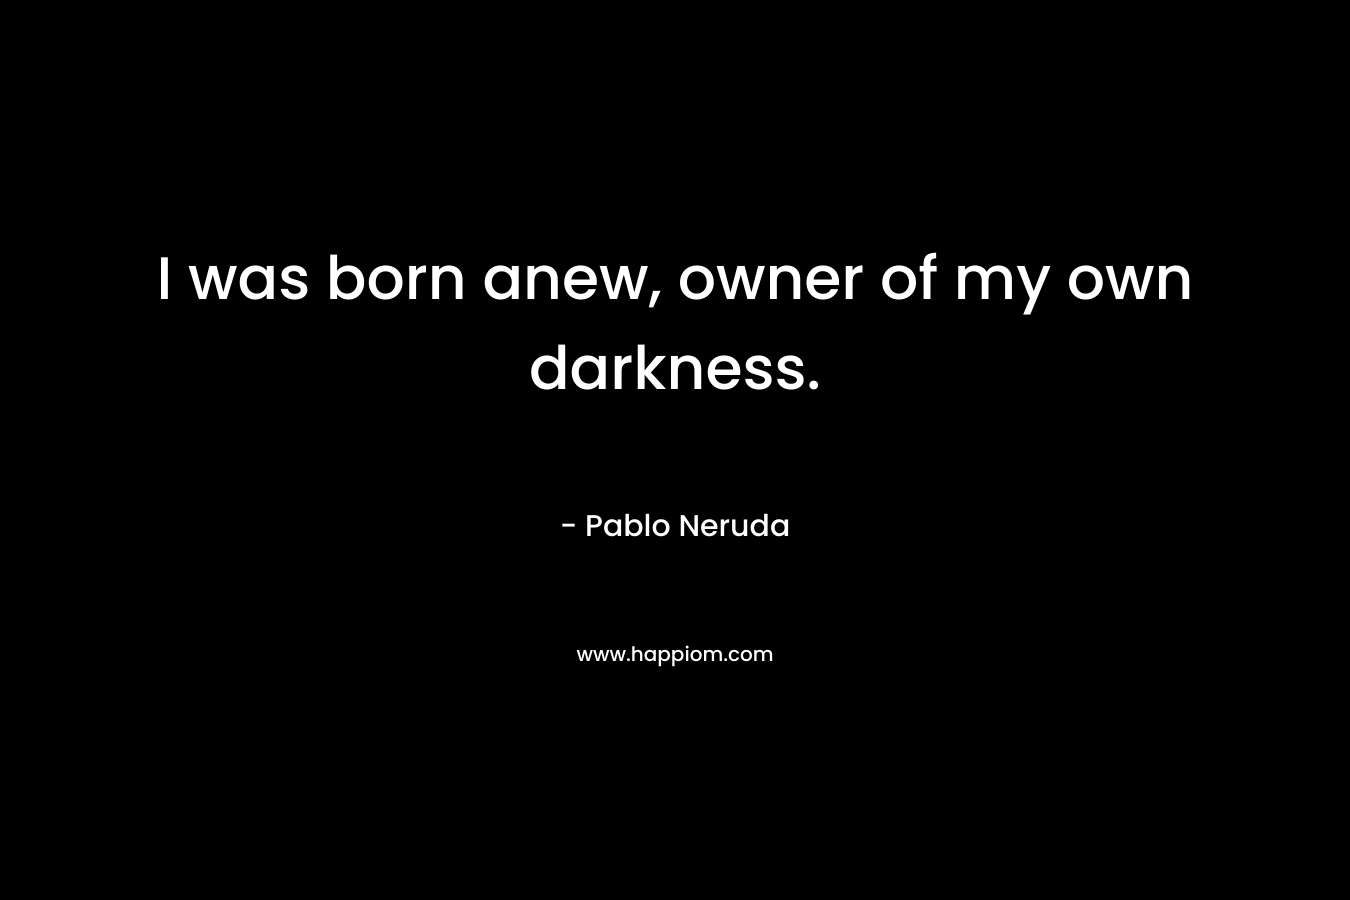 I was born anew, owner of my own darkness. – Pablo Neruda